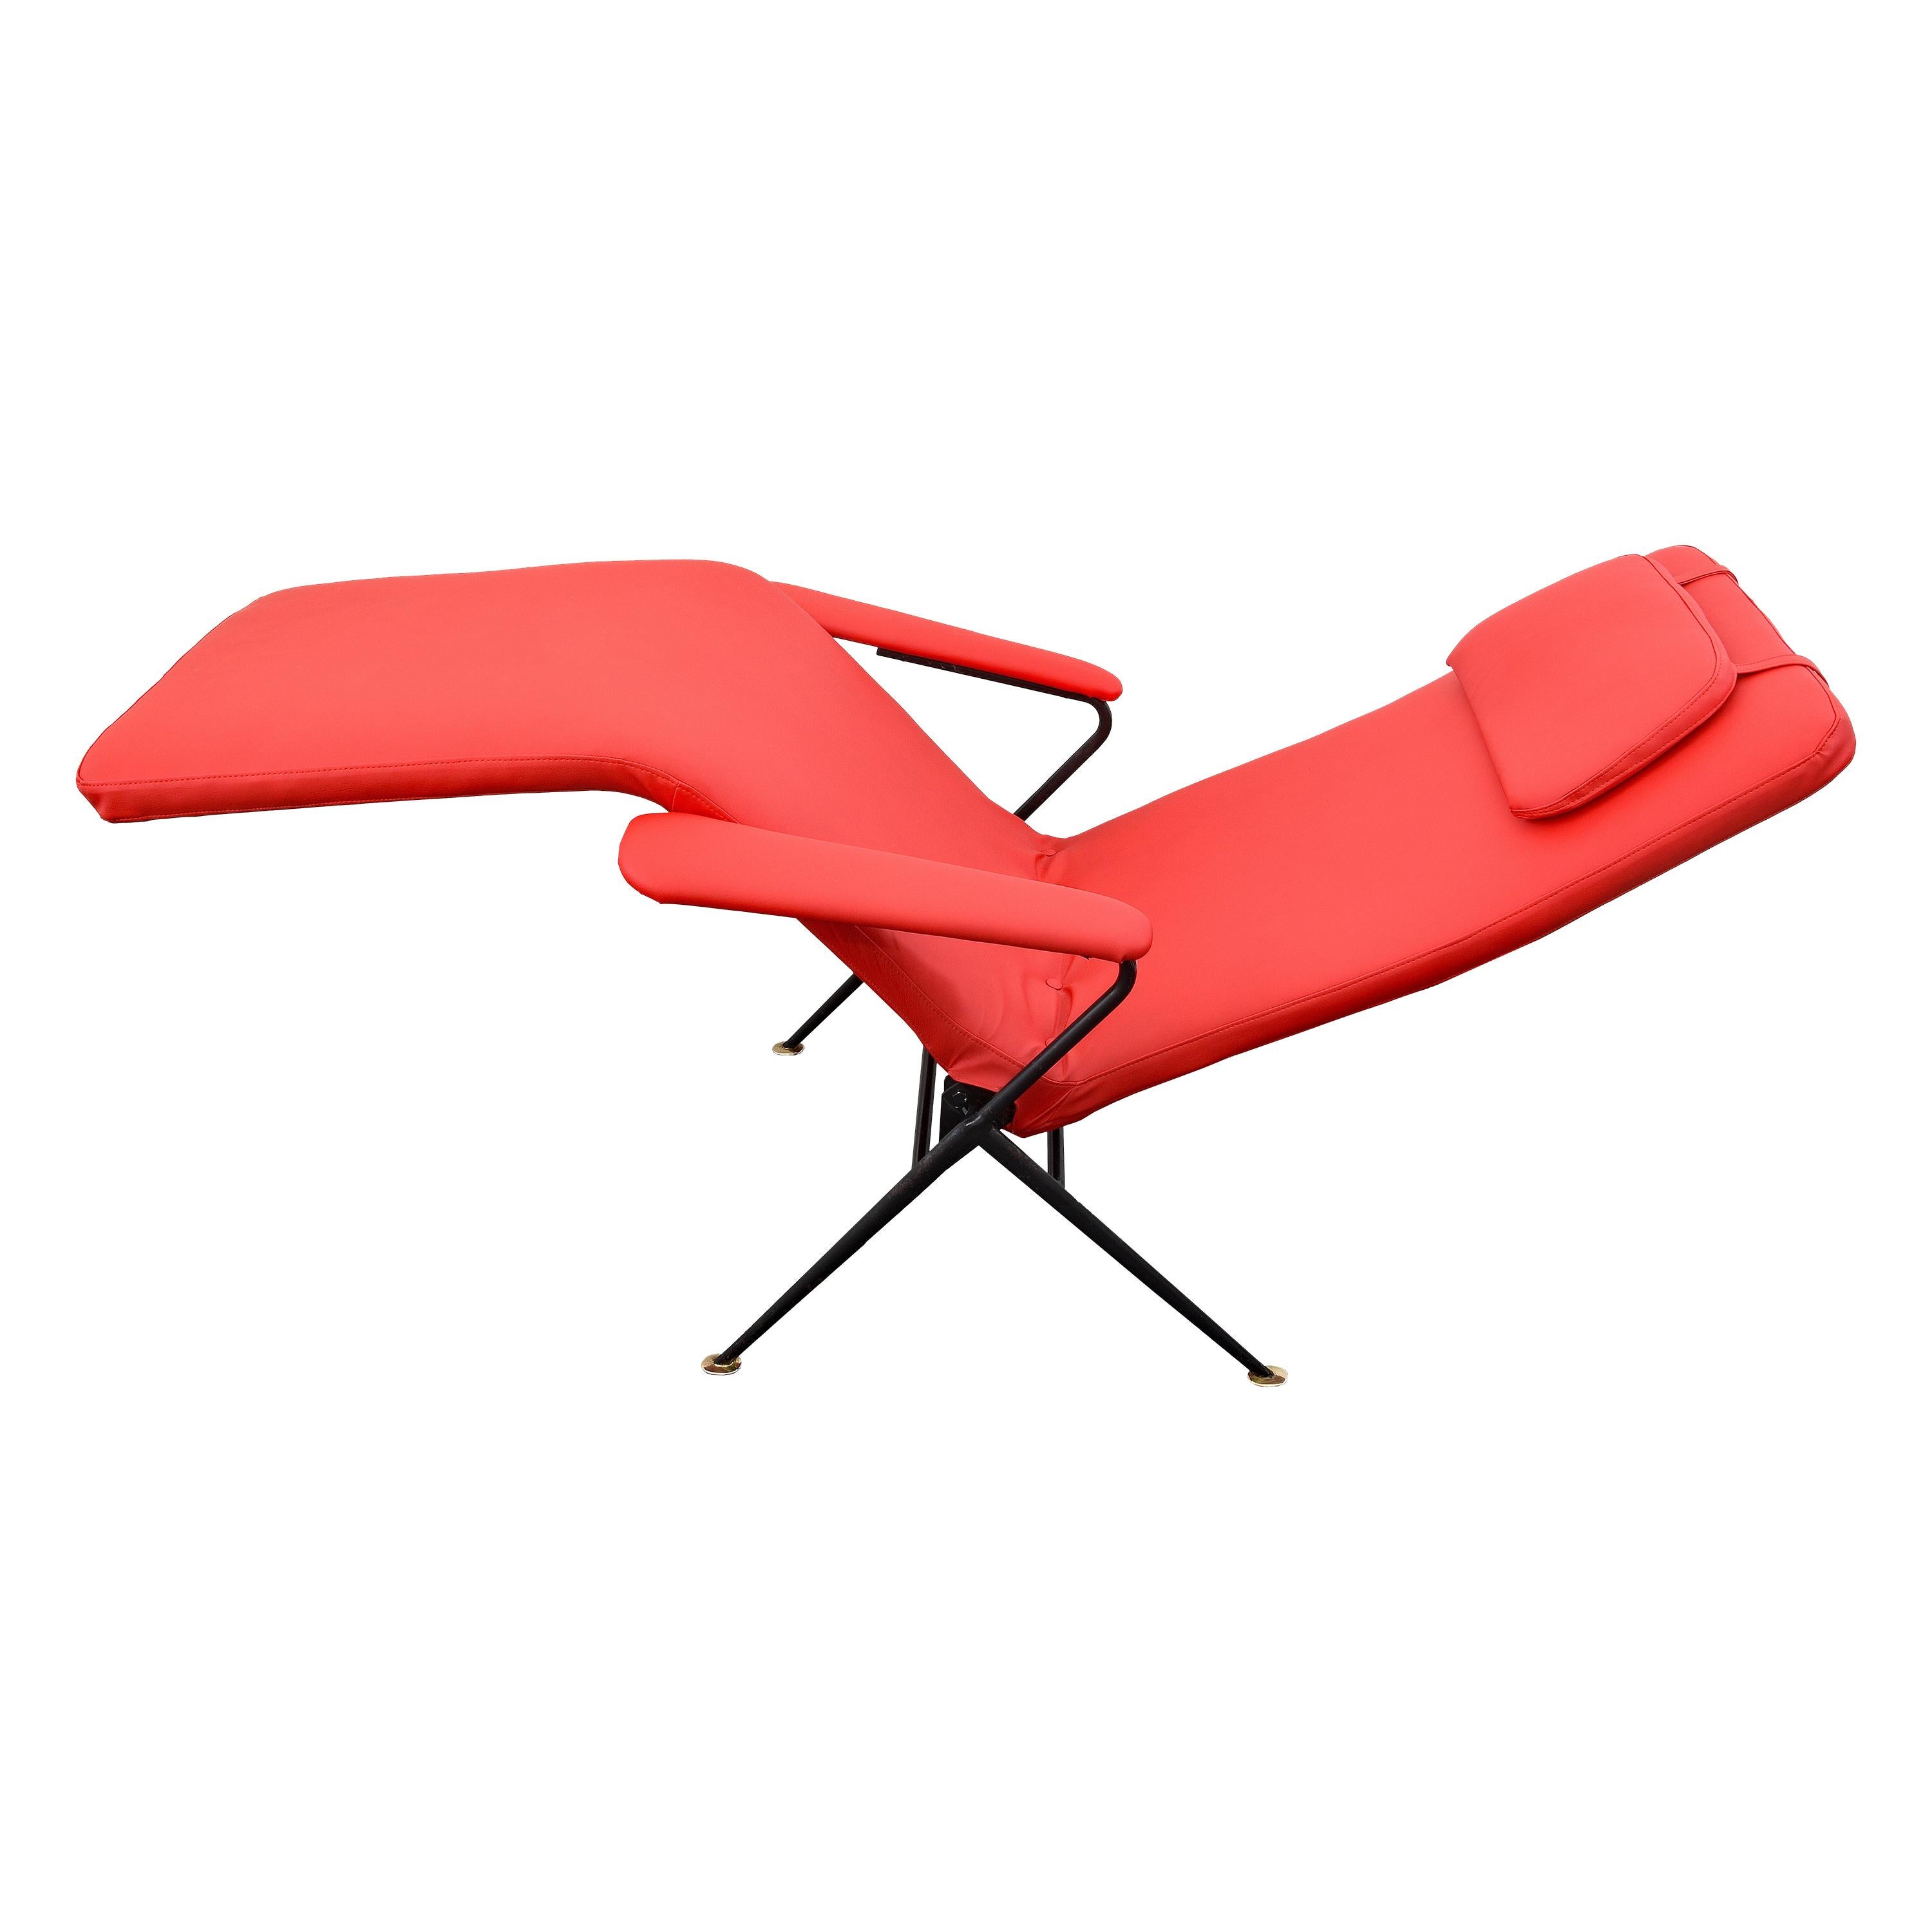 Sunlounger / Deckchair in Red, Chaise Lounge / Capri Lounger, Italy, 1950s For Sale